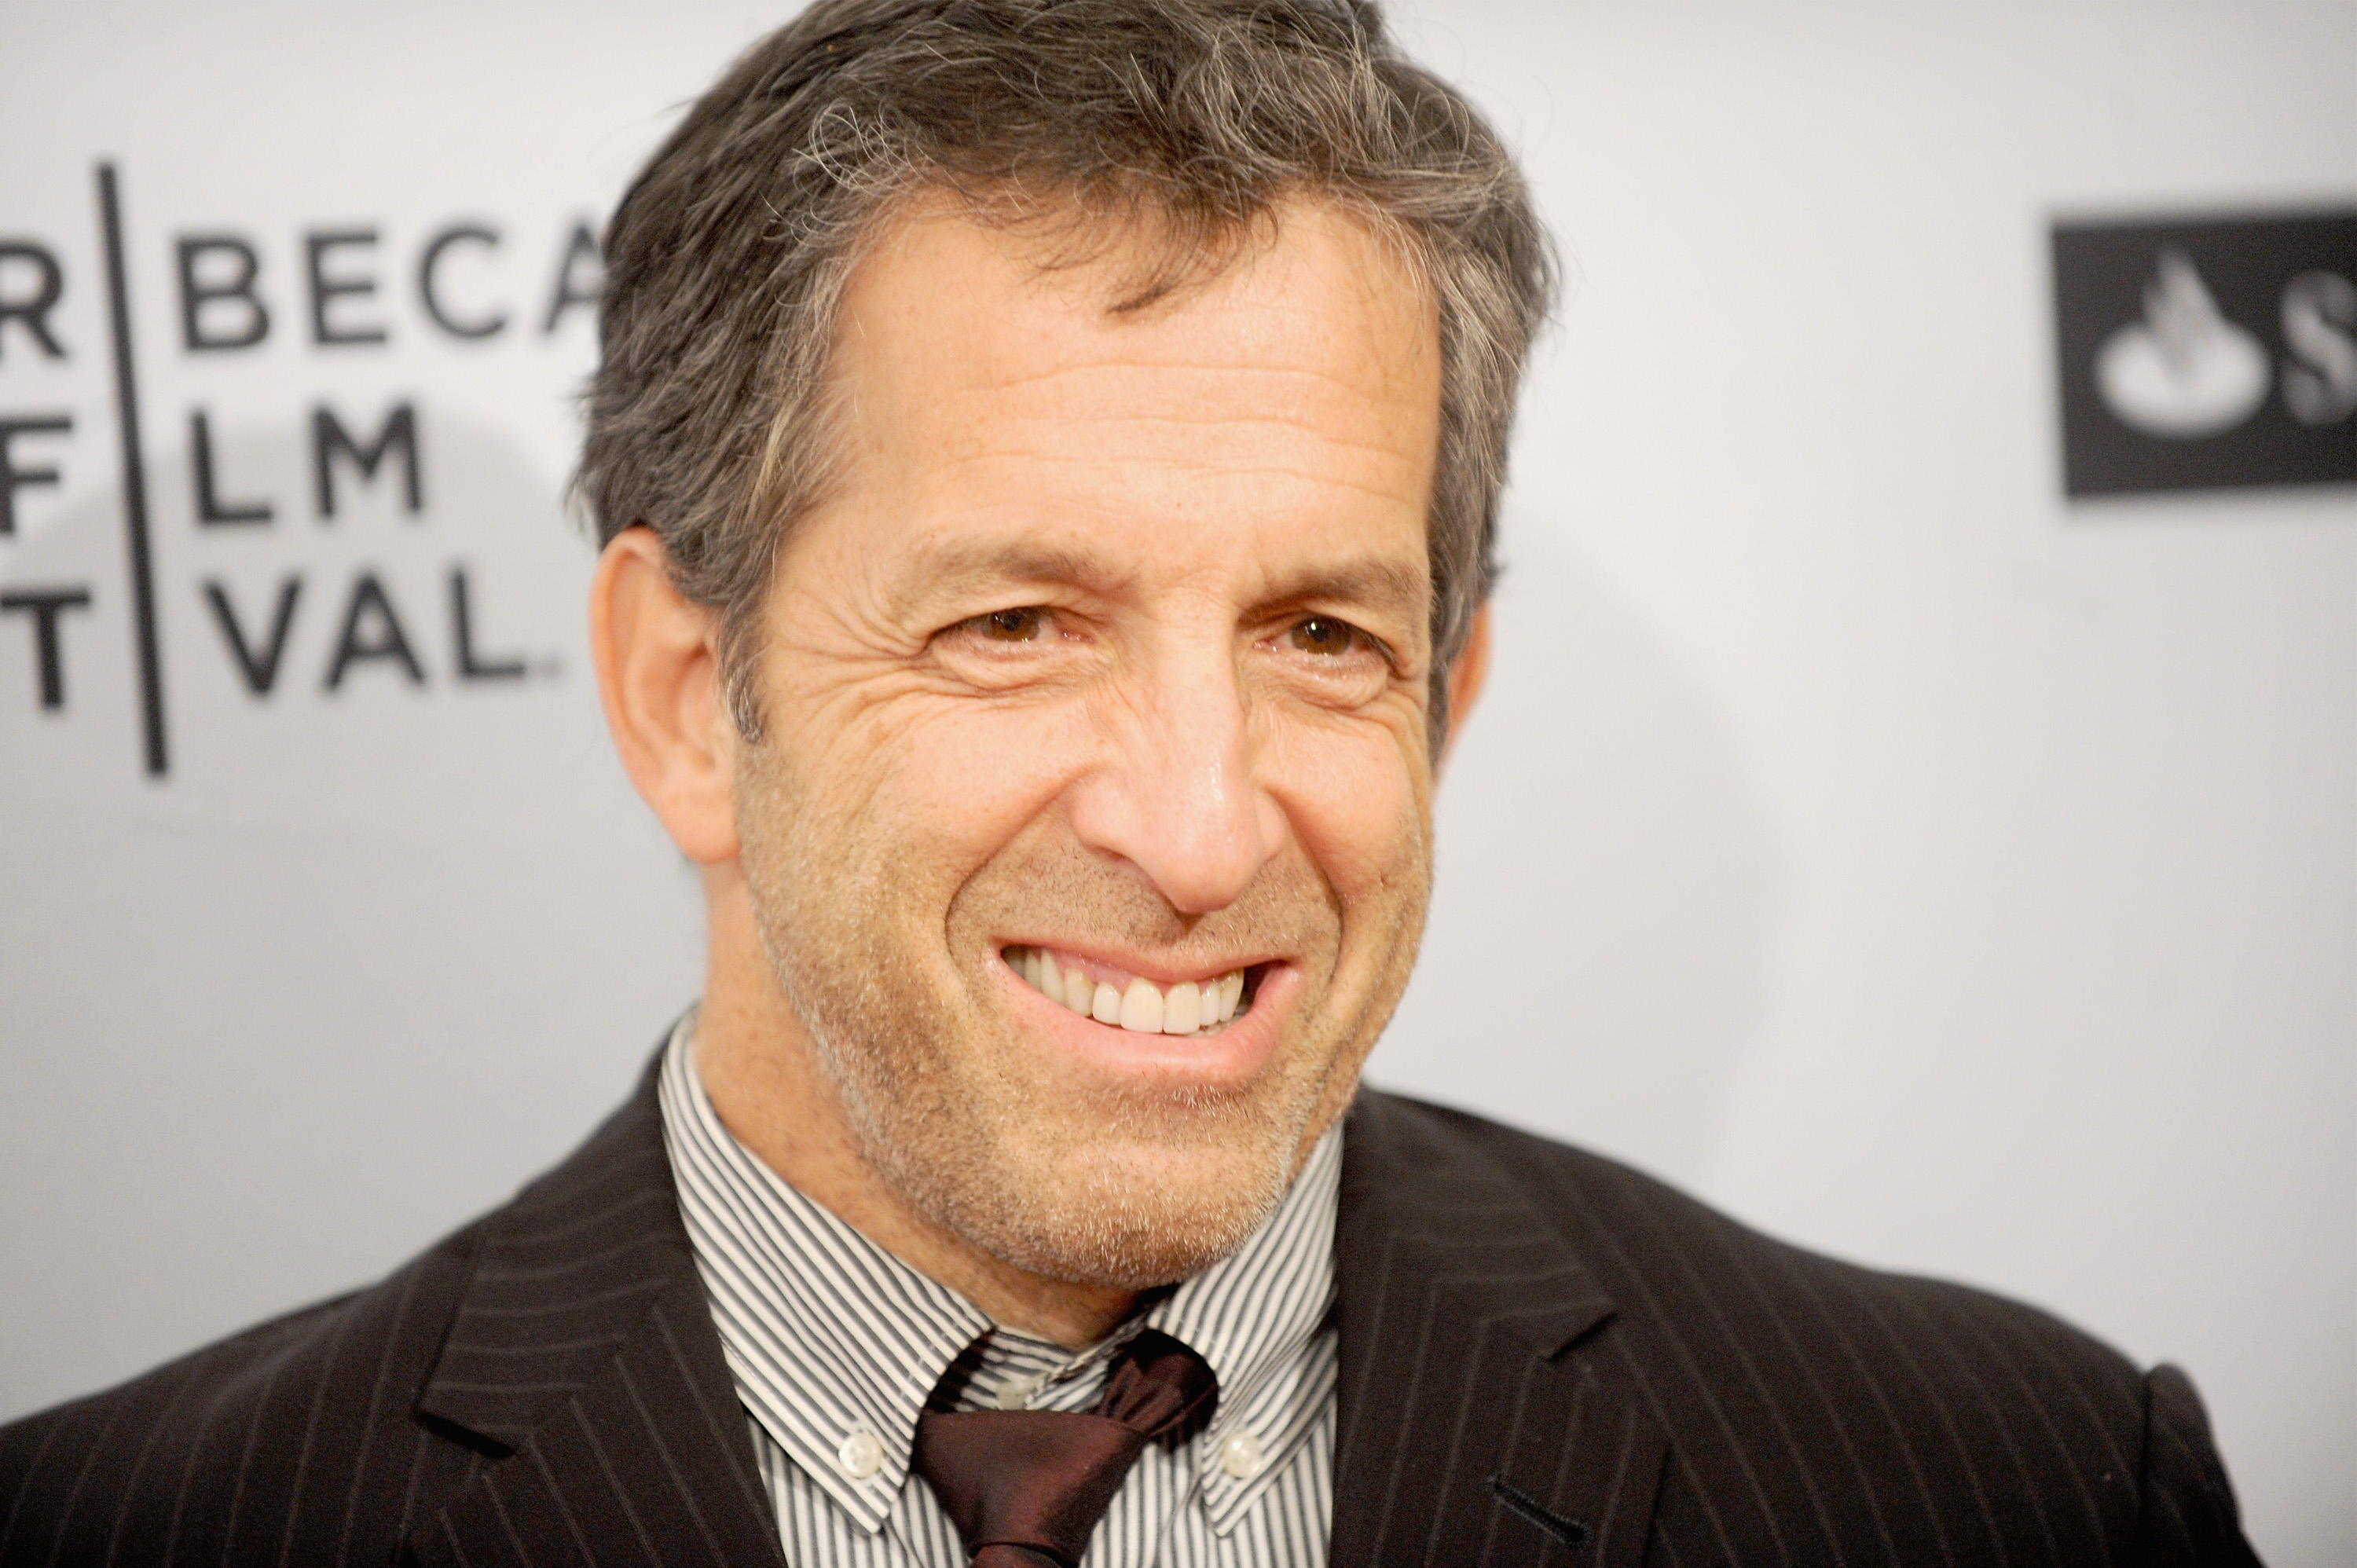 Designer Kenneth Cole attends the premiere of "In My Father's House" during the 2015 Tribeca Film Festival on April 16, 2015 in New York City. (Brad Barket&mdash;Getty Images)